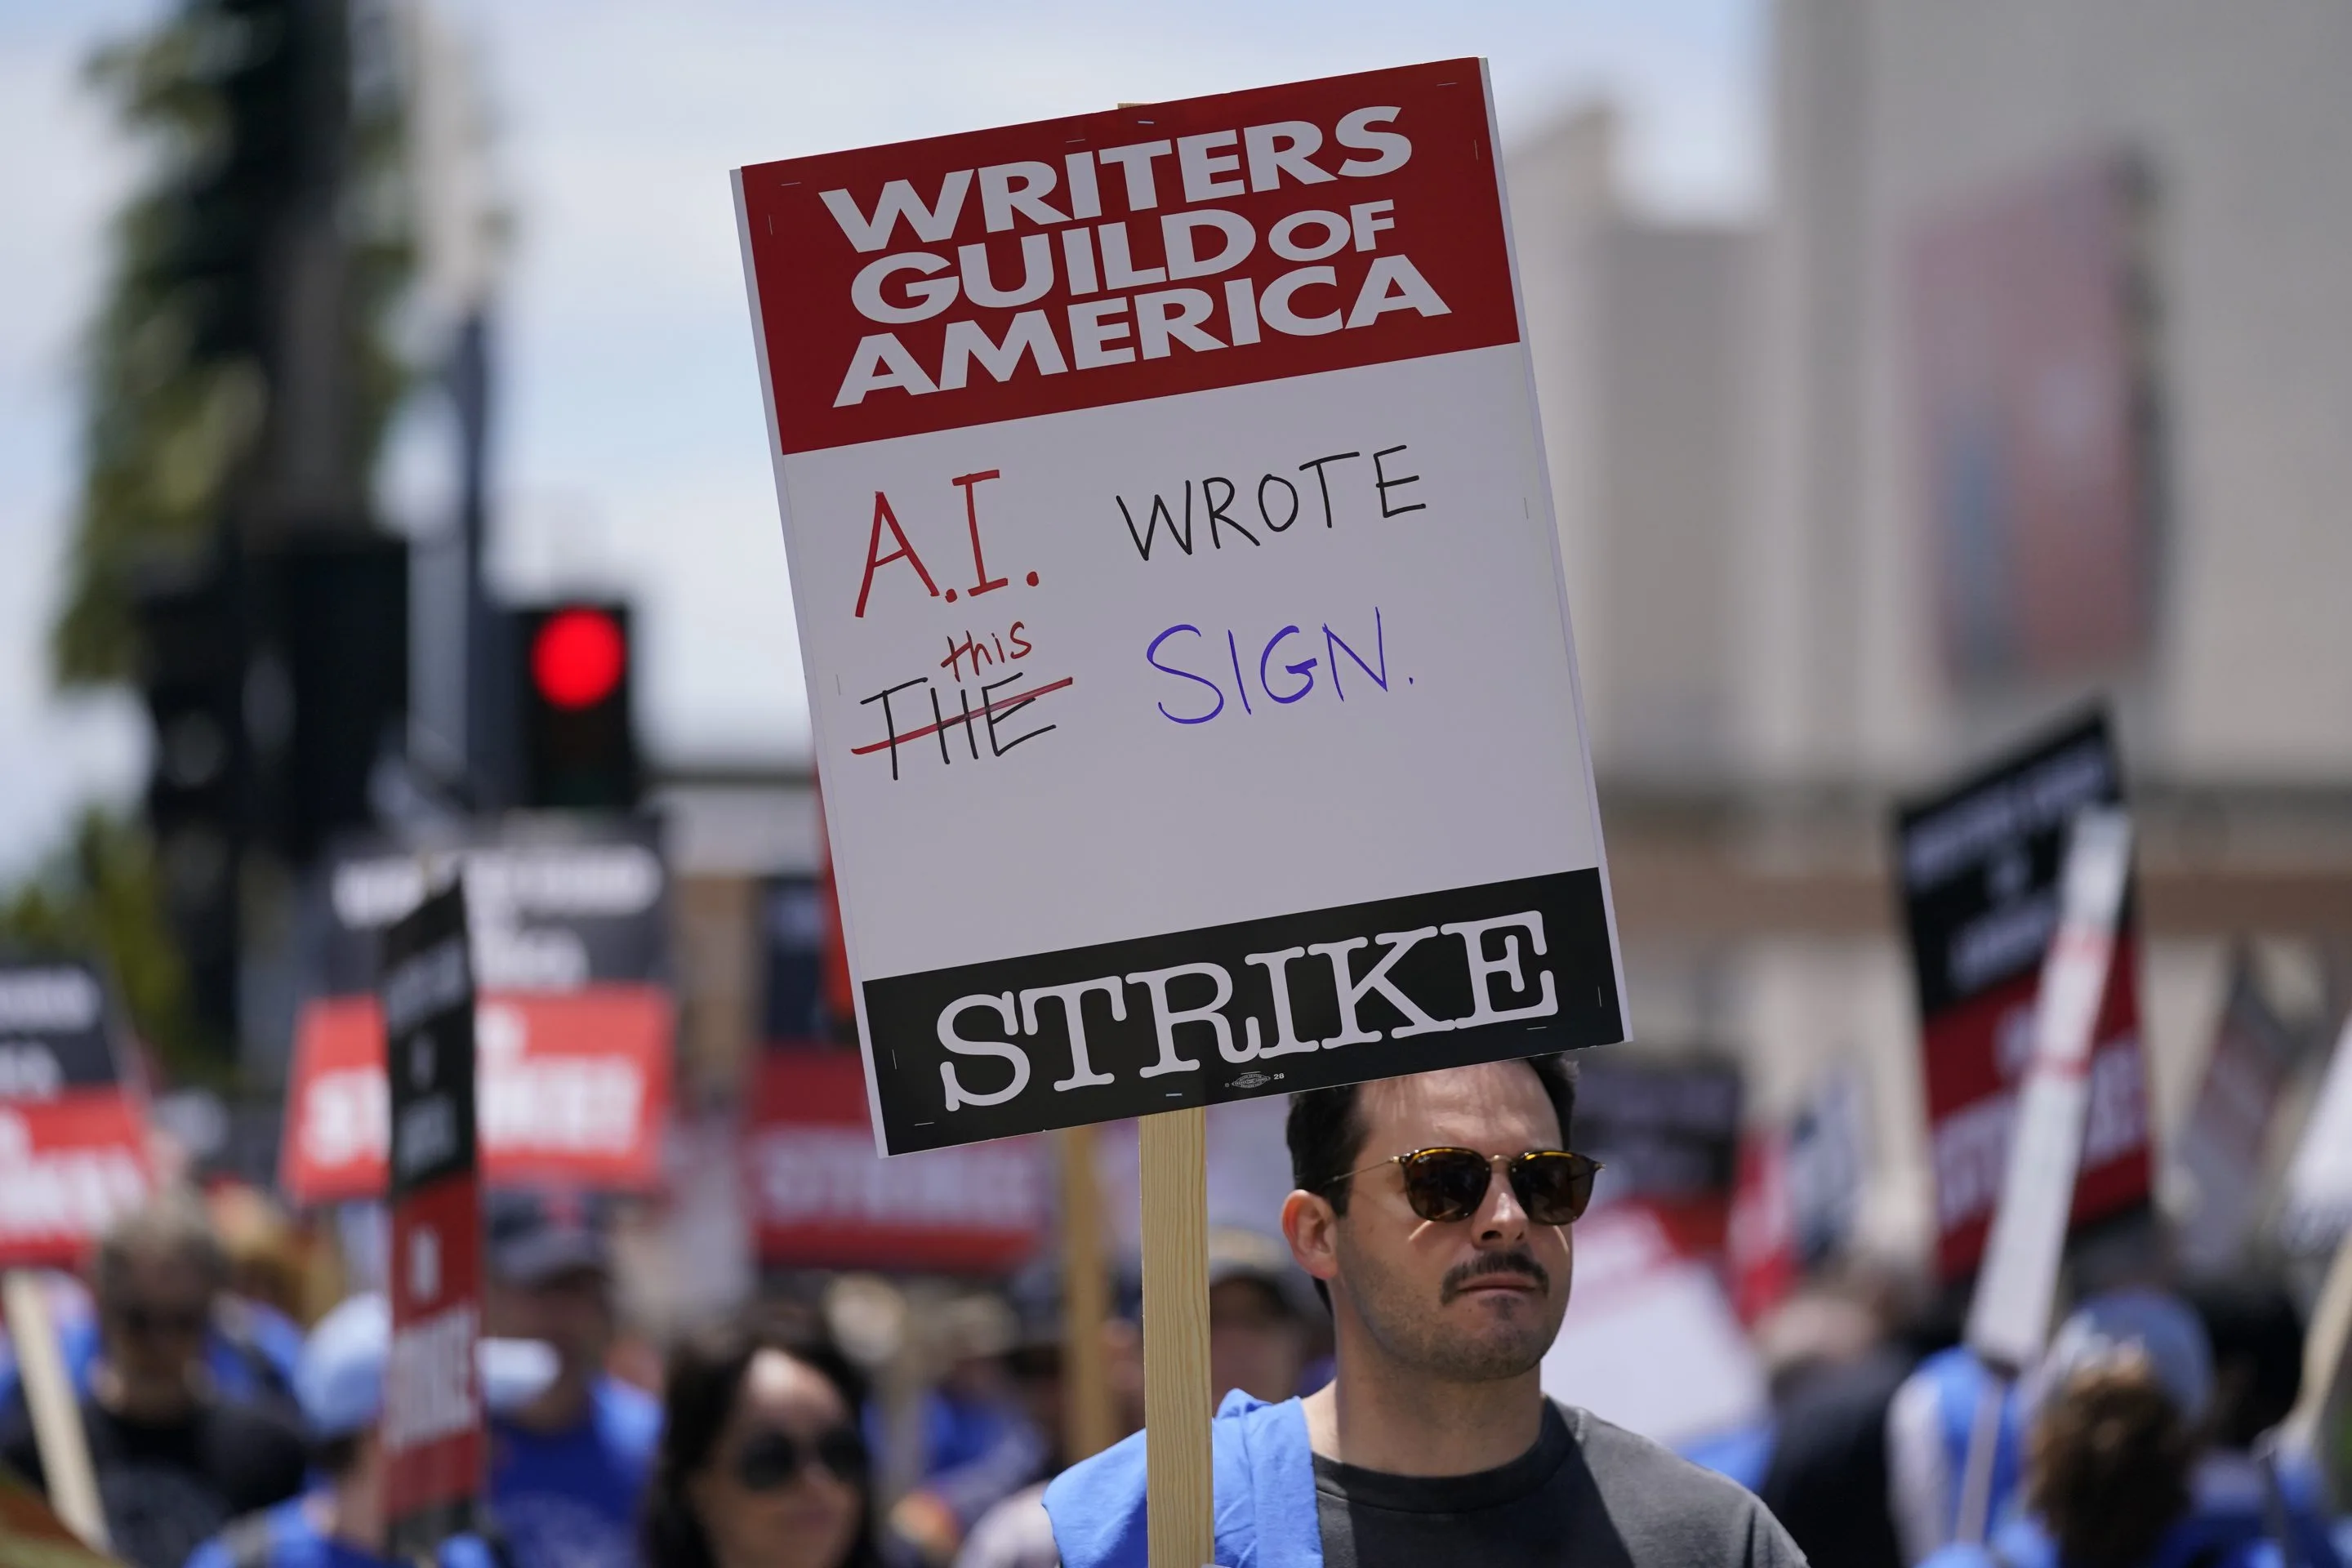 Screenwriters seek protections from AI as part of strike